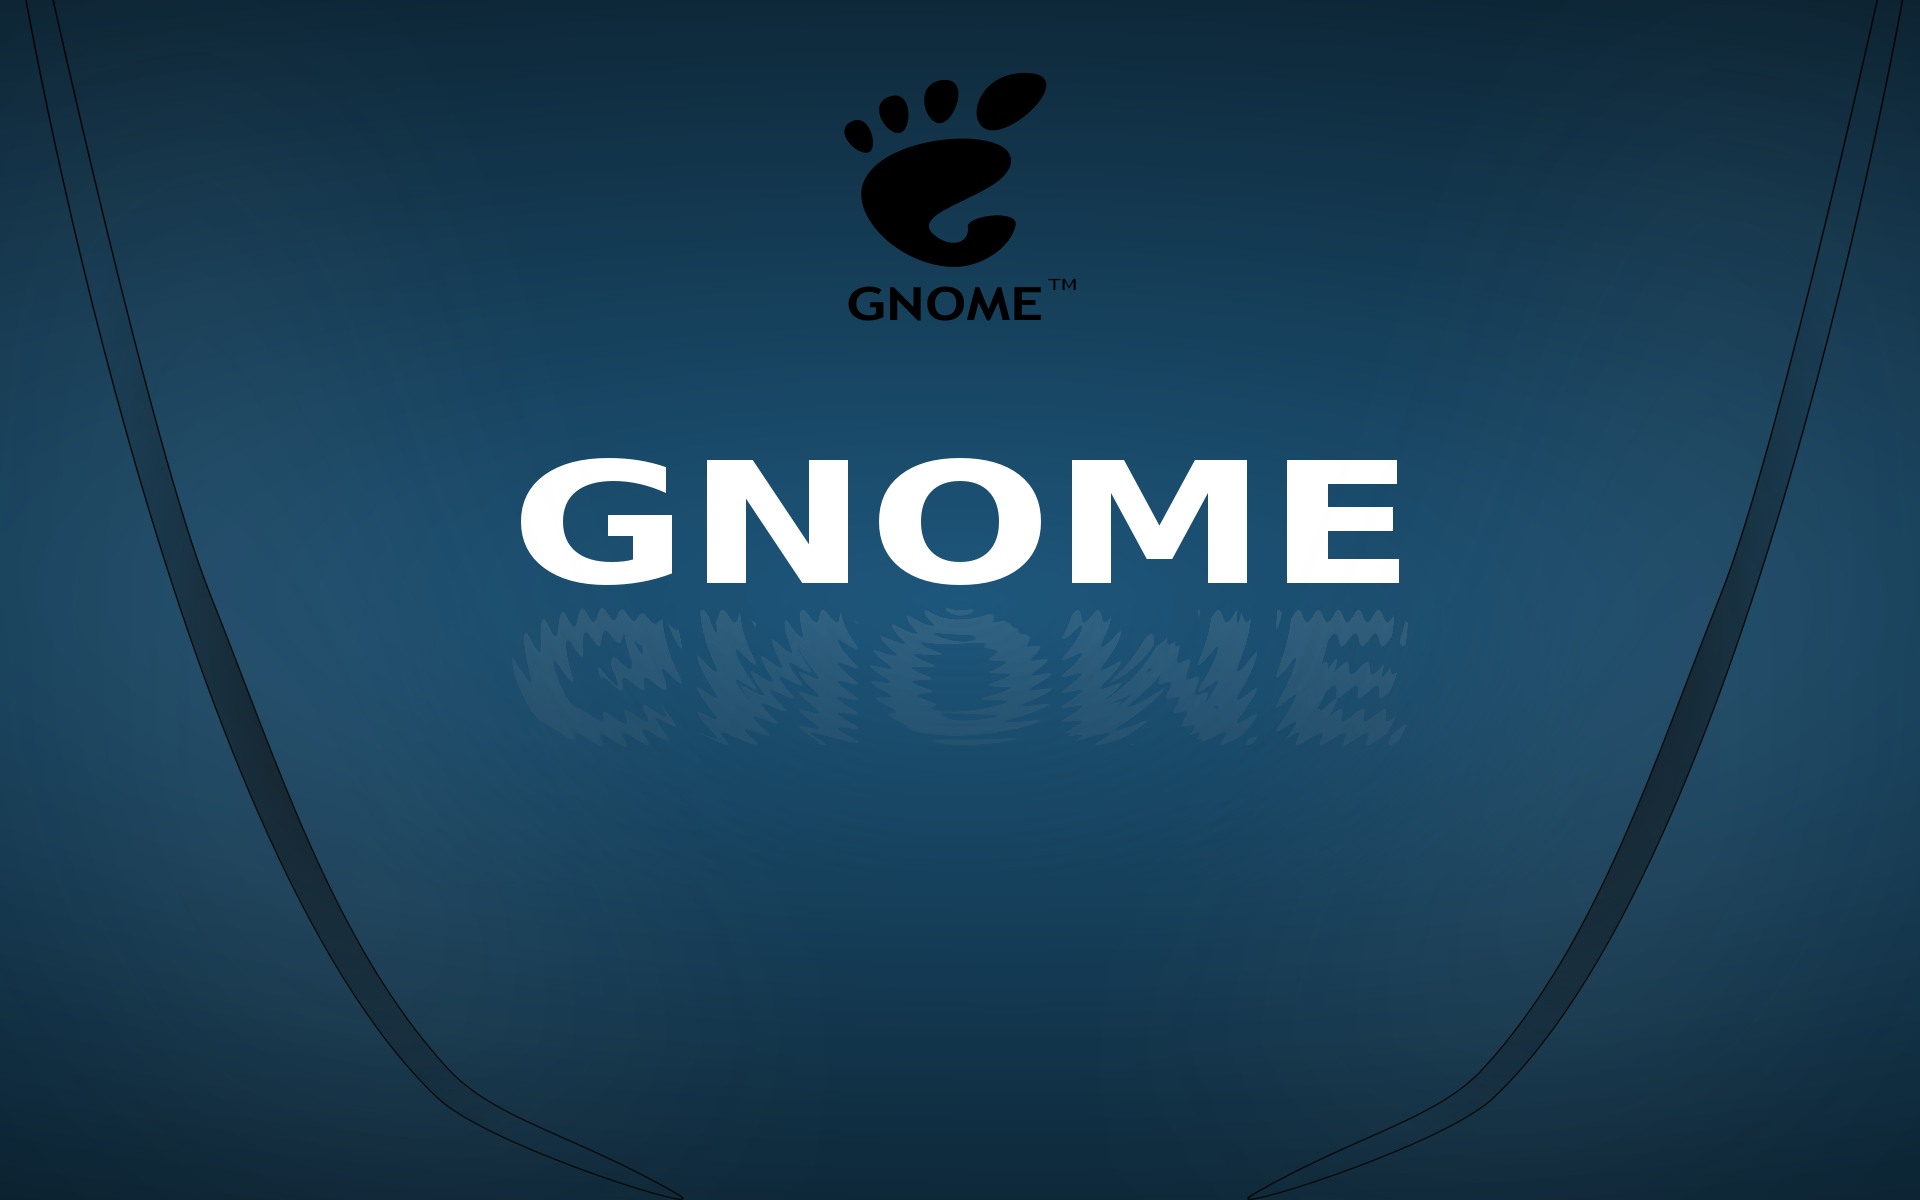 Macrons in Gnome